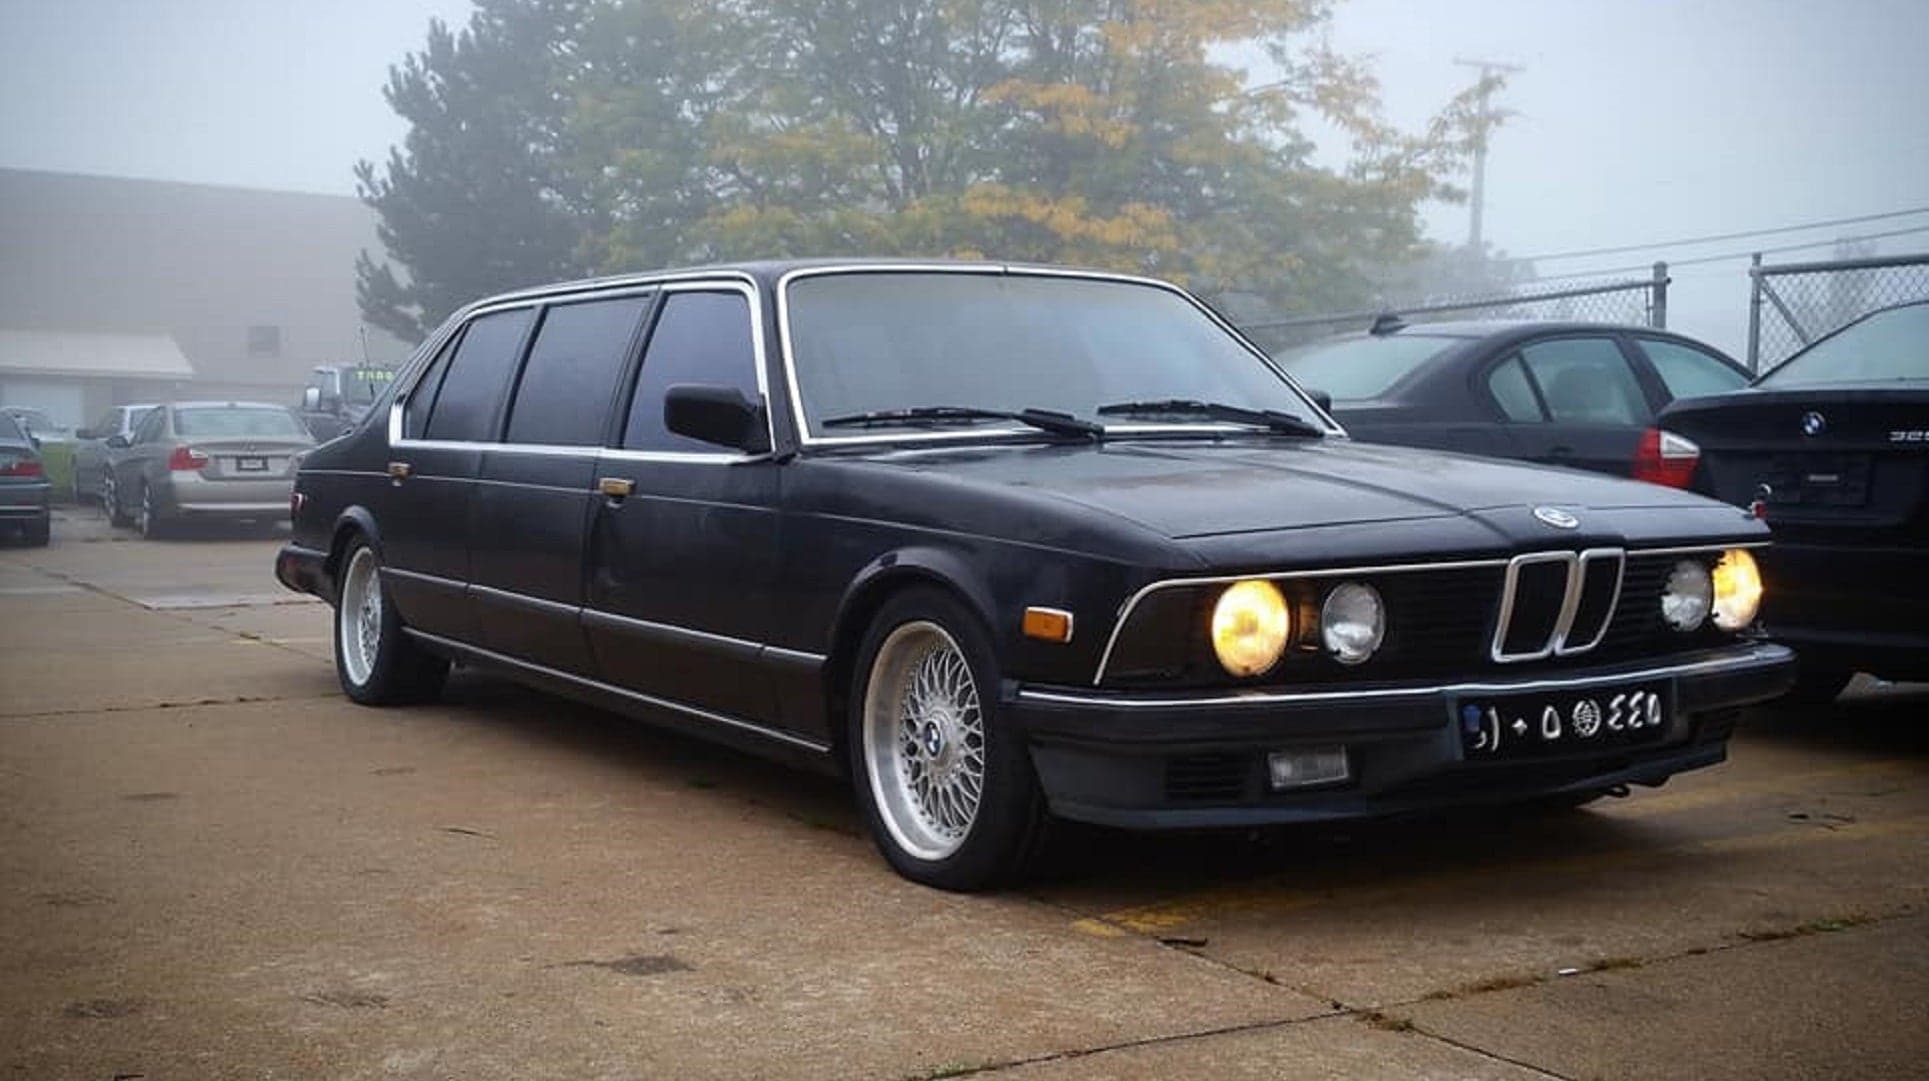 Arrive in Style in This 1985 BMW 745i Limo